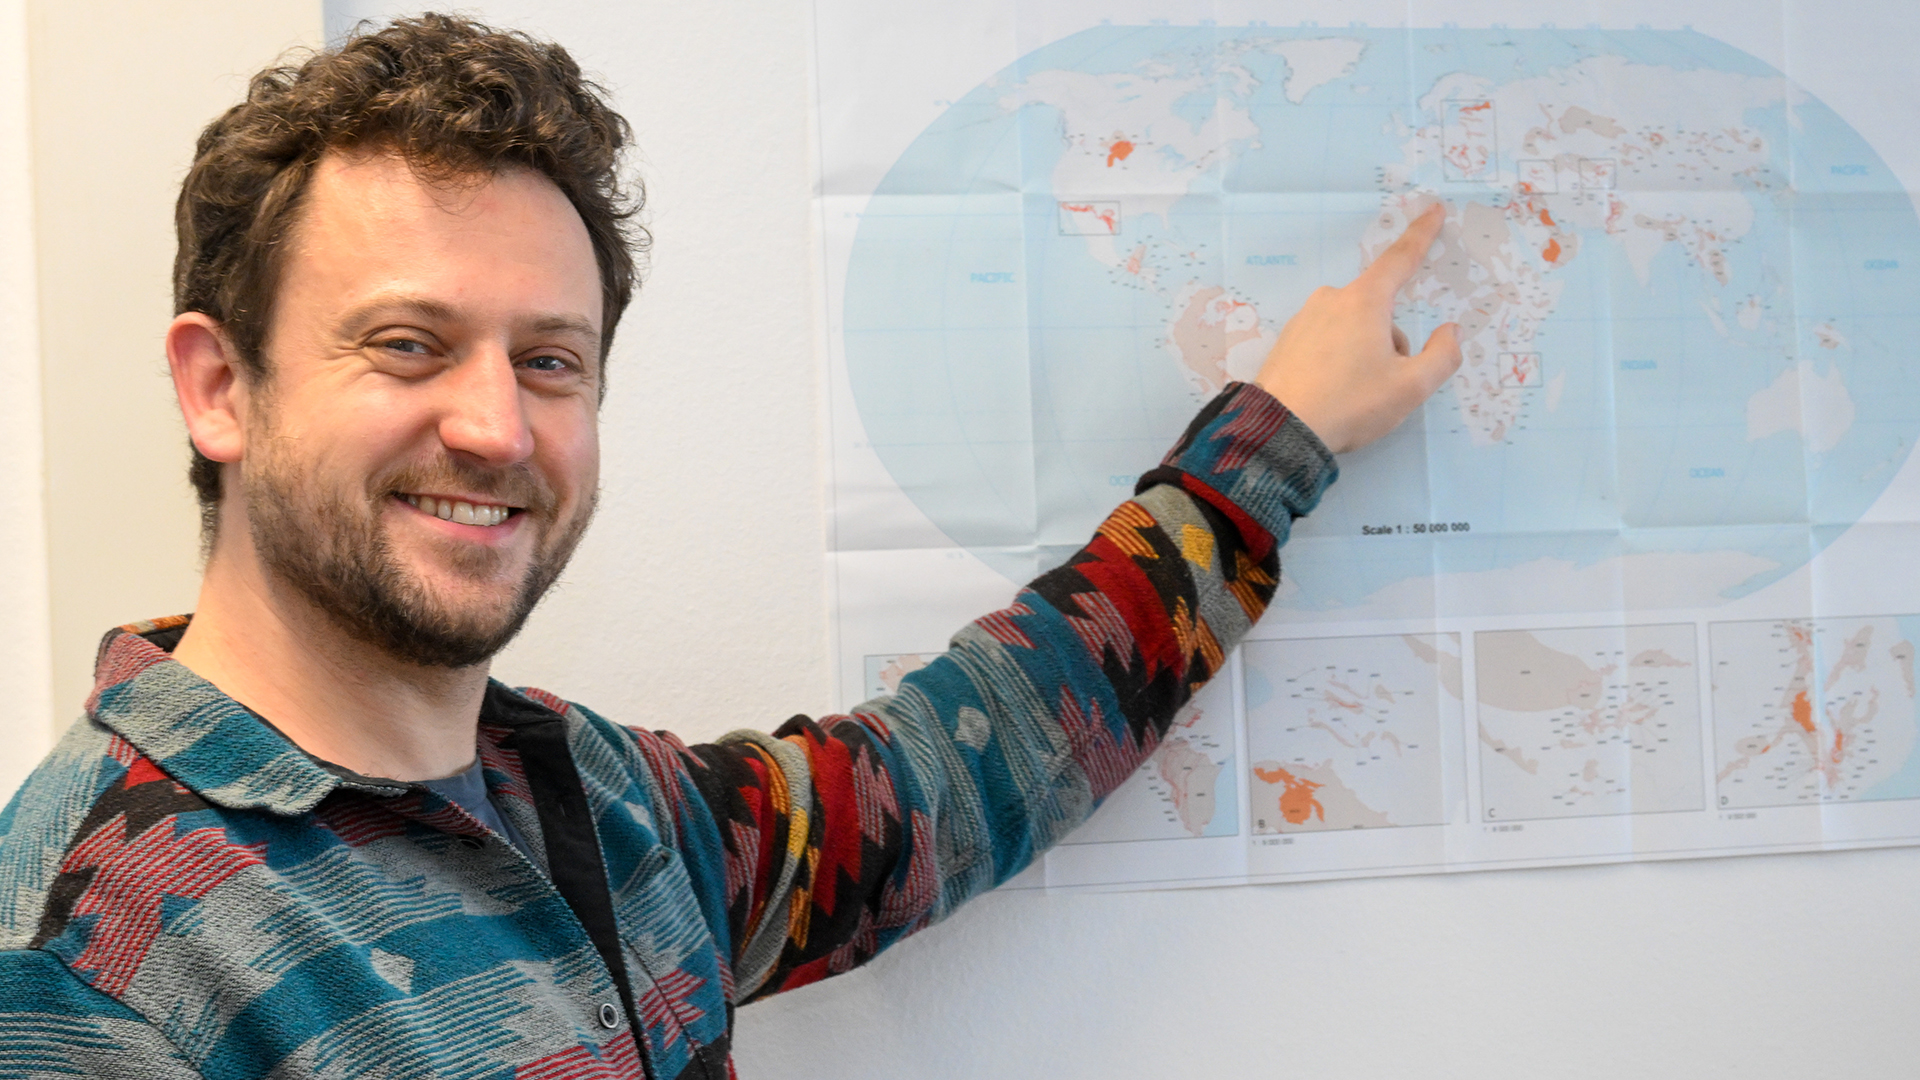 When teaching, Robert Reinecke does not solely concentrate on the digital dimensions of water research: "I'm a big fan of maps, including those printed on paper." (photo: Peter Thomas)